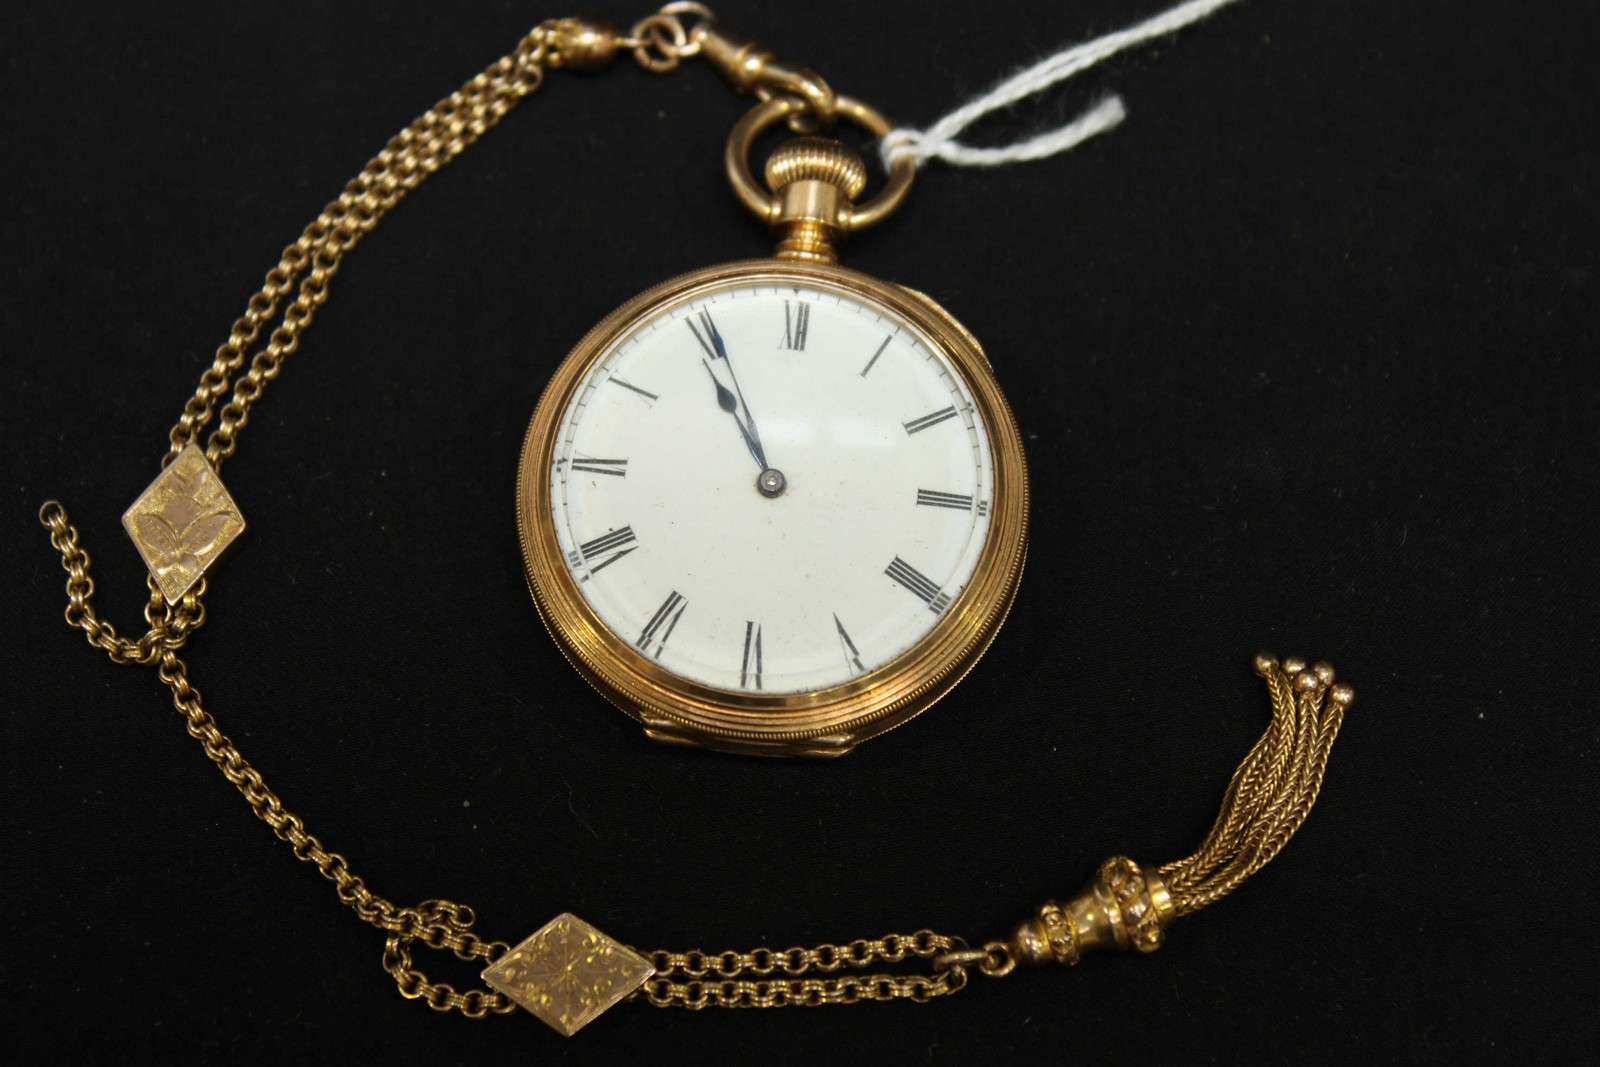 A Victorian 18K Waltham pocket watch, the white enamel dial with black Roman numerals, with banded